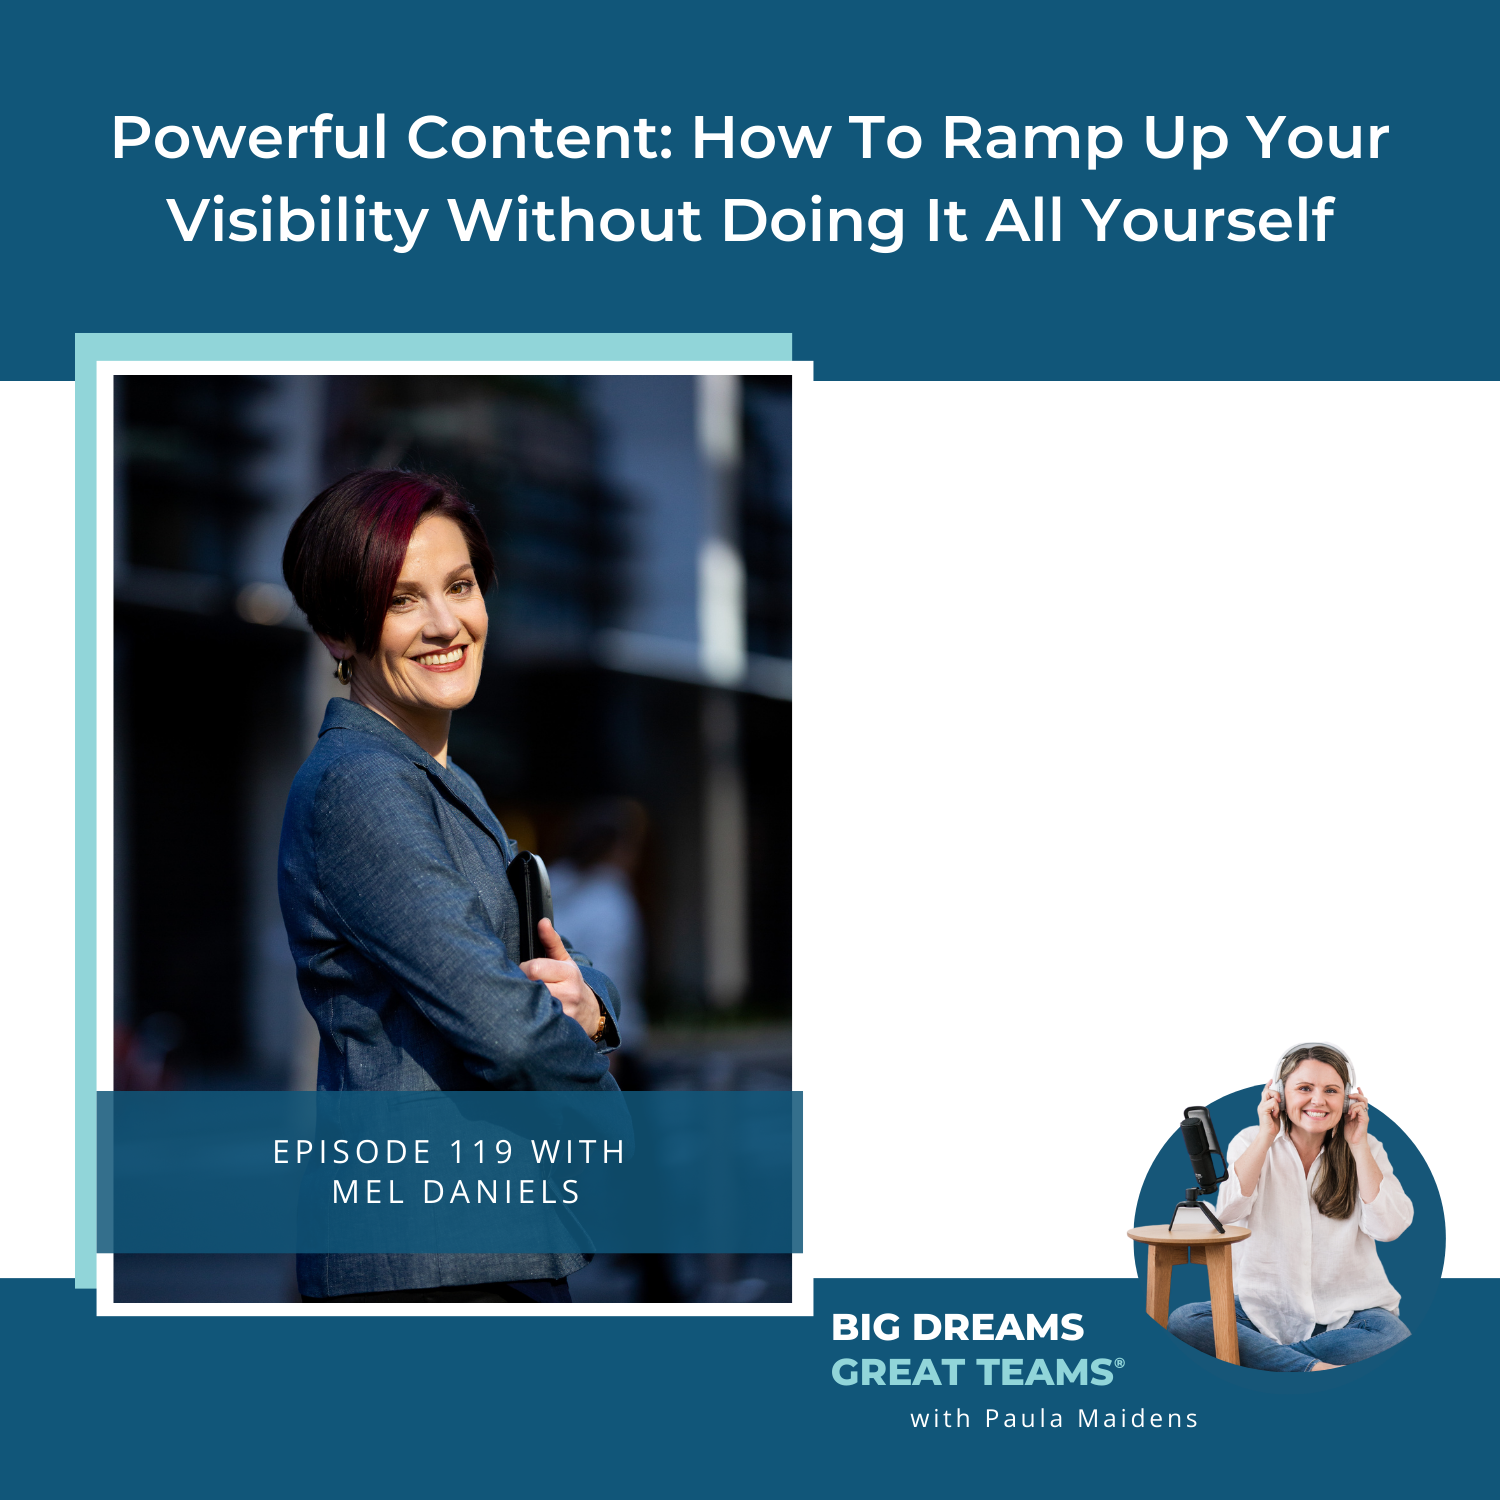 Episode 119 - Powerful Content: How to ramp up your visibility without doing it all yourself with Mel Daniels